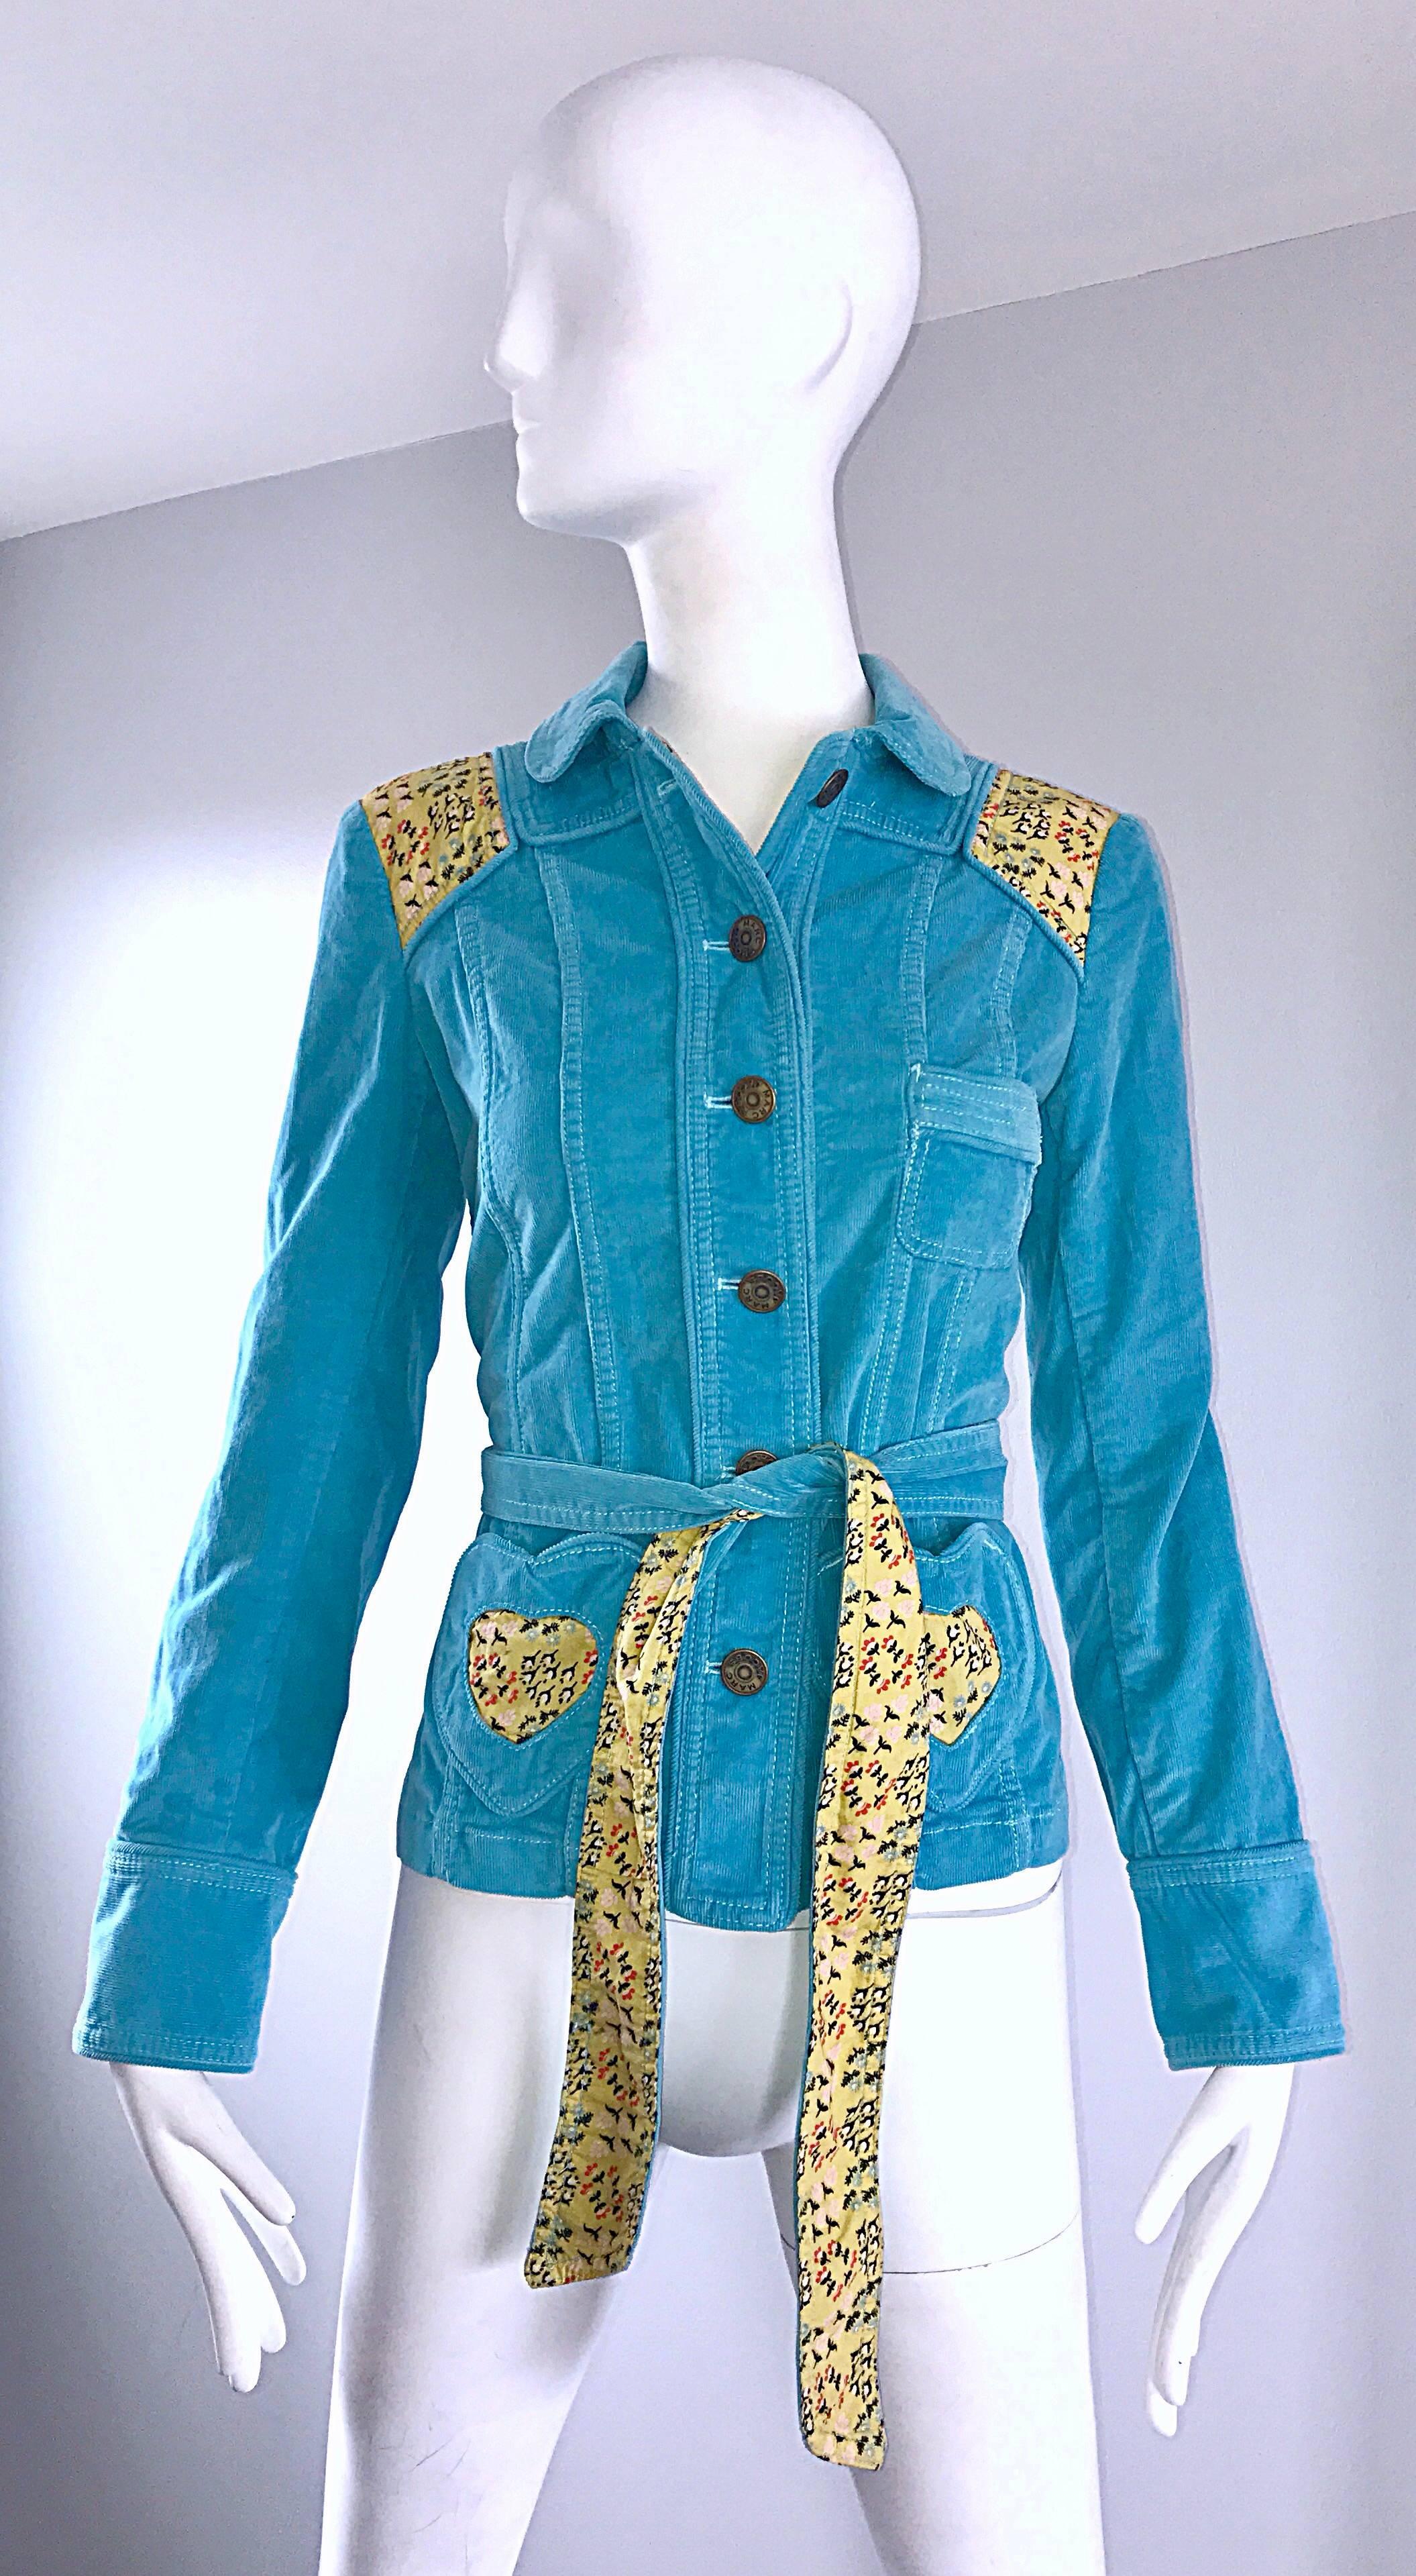 Chic early 2000s MARC JACOBS teal turquoise blue and yellow patchwork belted jacket! Soft cotton corduroy is perfect all year. Yellow flower patchworks throughout. Two heart shape patches on each side of the waist also serve as pockets. Heart